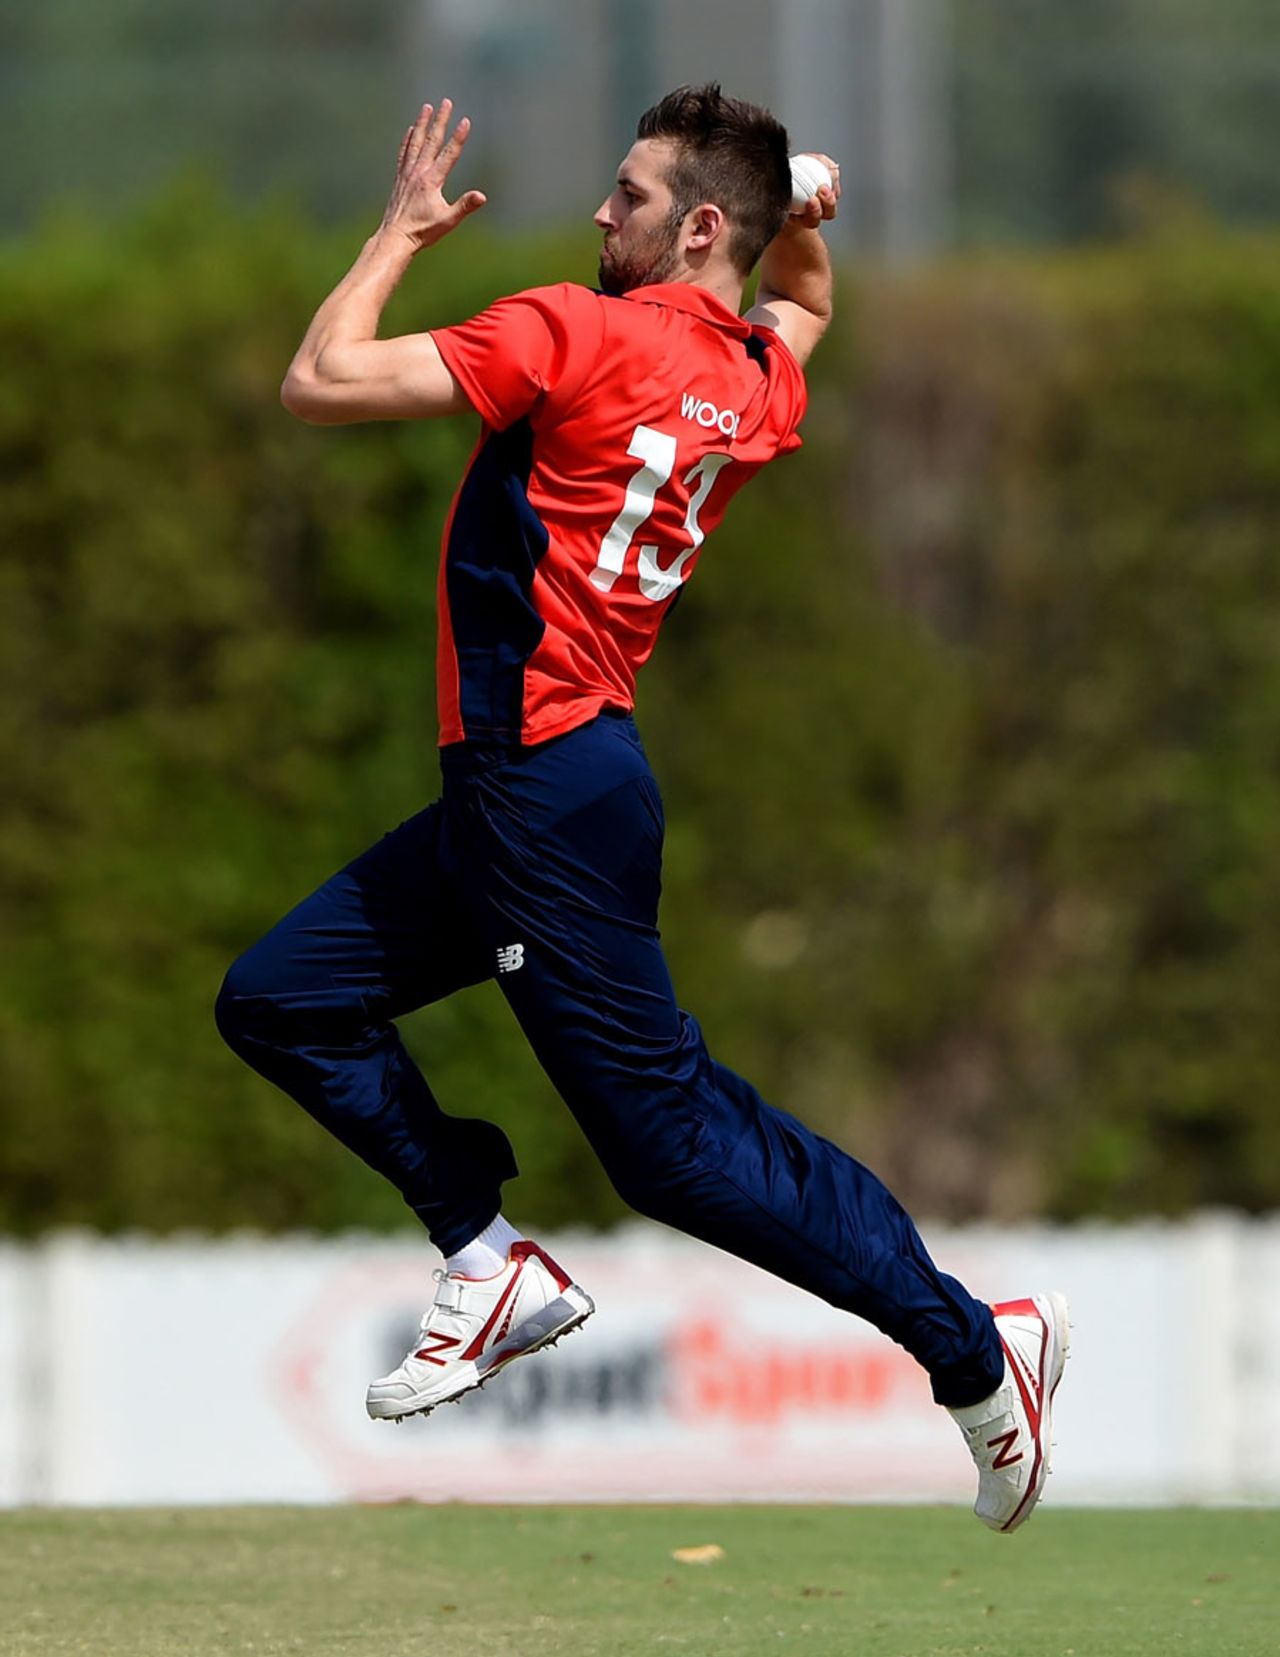 Mark Wood launches into his delivery stride, North v Worcestershire, ECB North v South series warm-up, Dubai, March 15, 2017